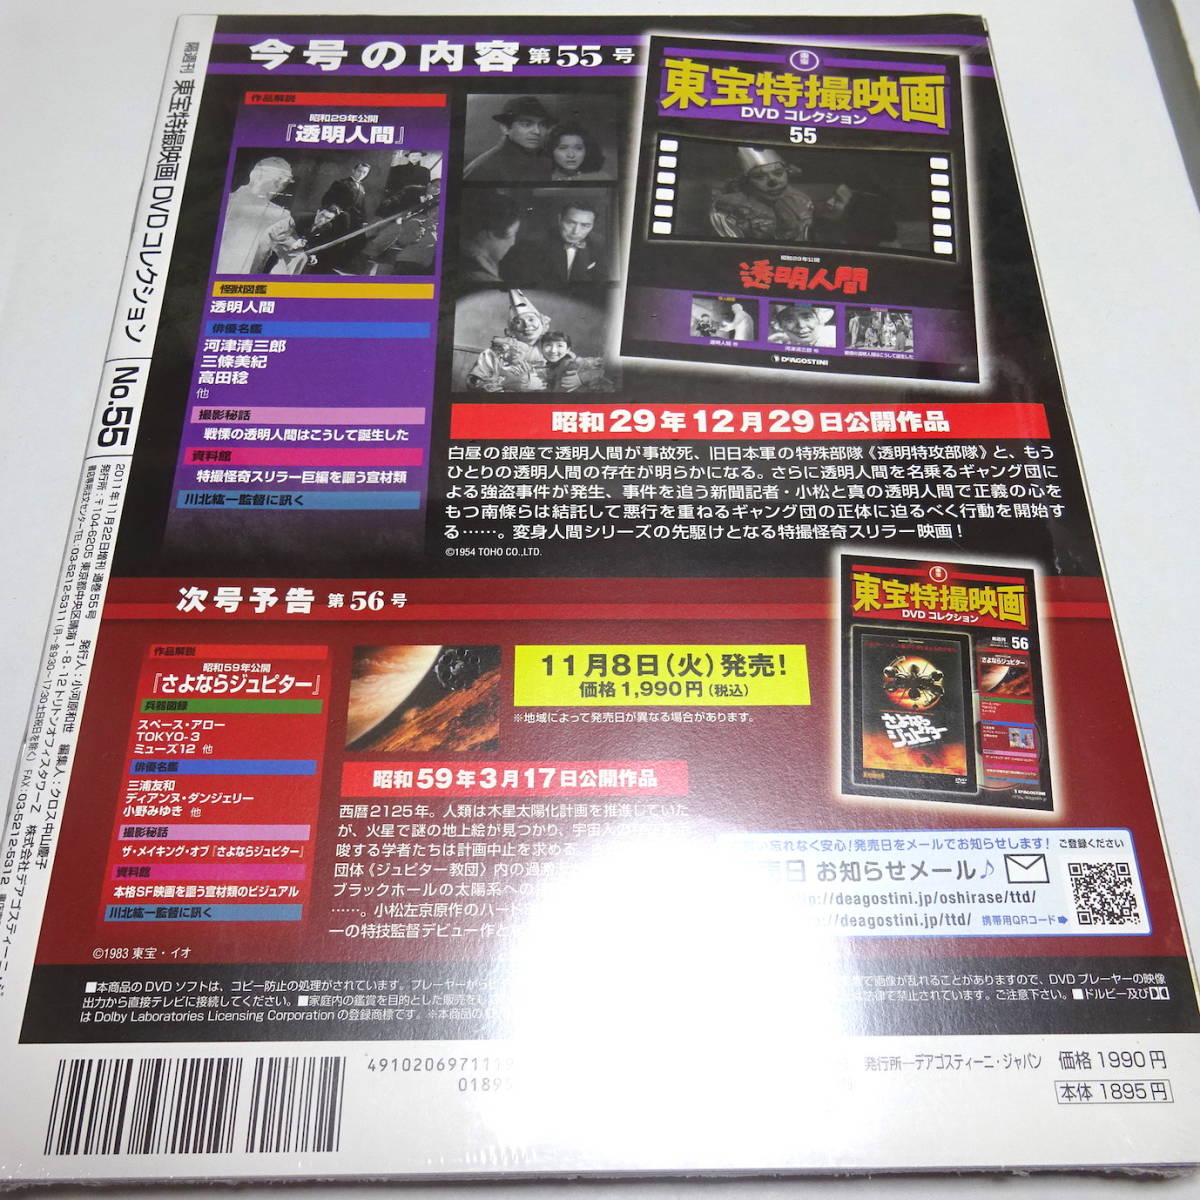  prompt decision unopened [ transparent human ] higashi . special effects movie DVD collection 